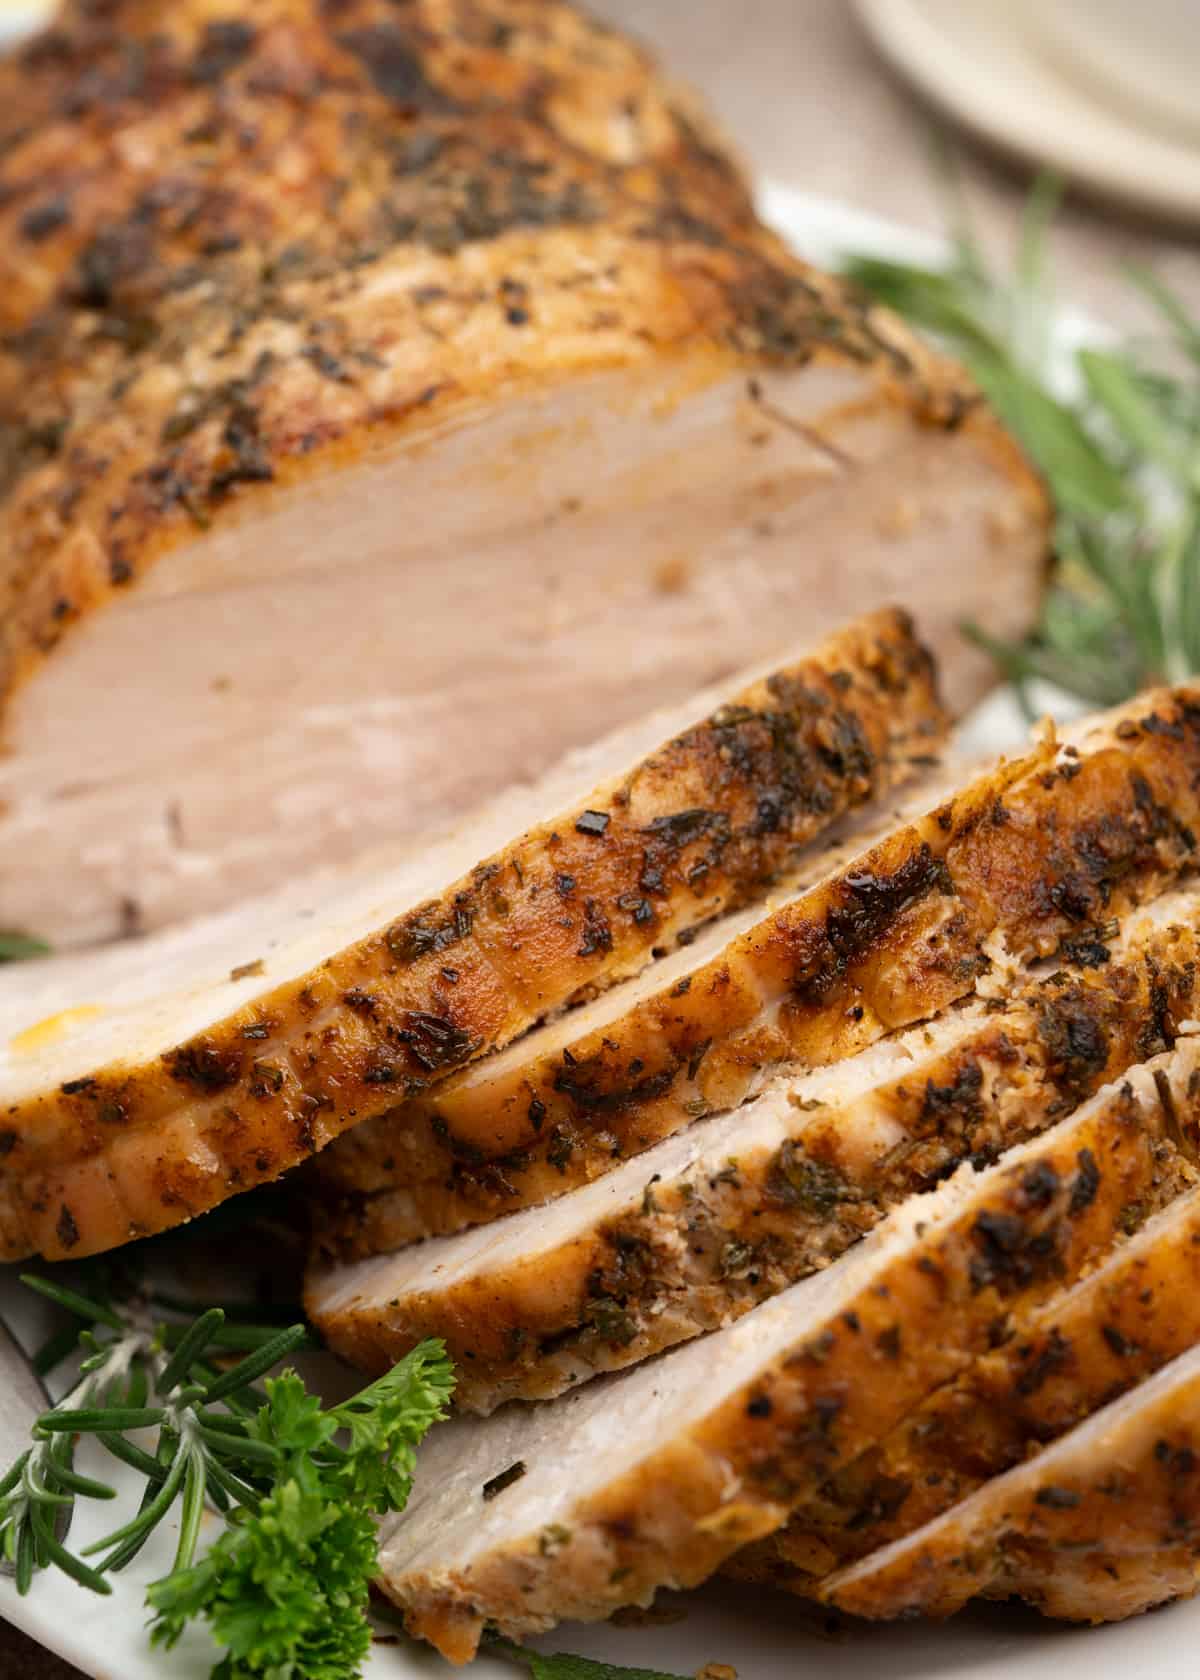 Shows a stack of sliced turkey breast roast highlighted a herby crust and tender meat and garnishes with rosemary sprig.